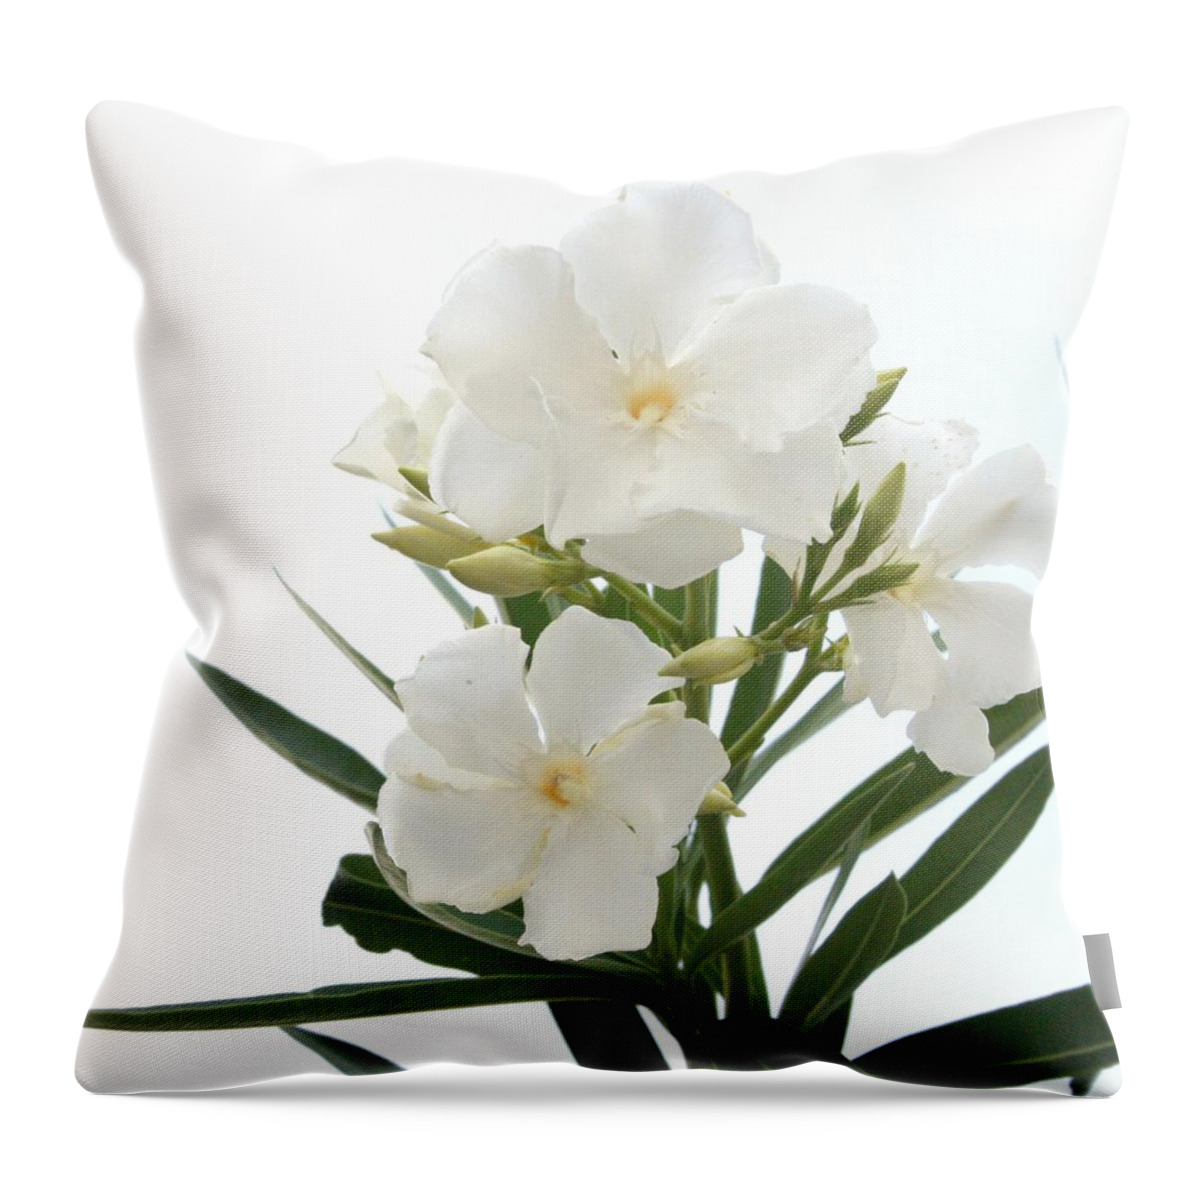 Nerium Oleander Throw Pillow featuring the photograph White Oleander Flowers Close Up Isolated On White Background by Taiche Acrylic Art